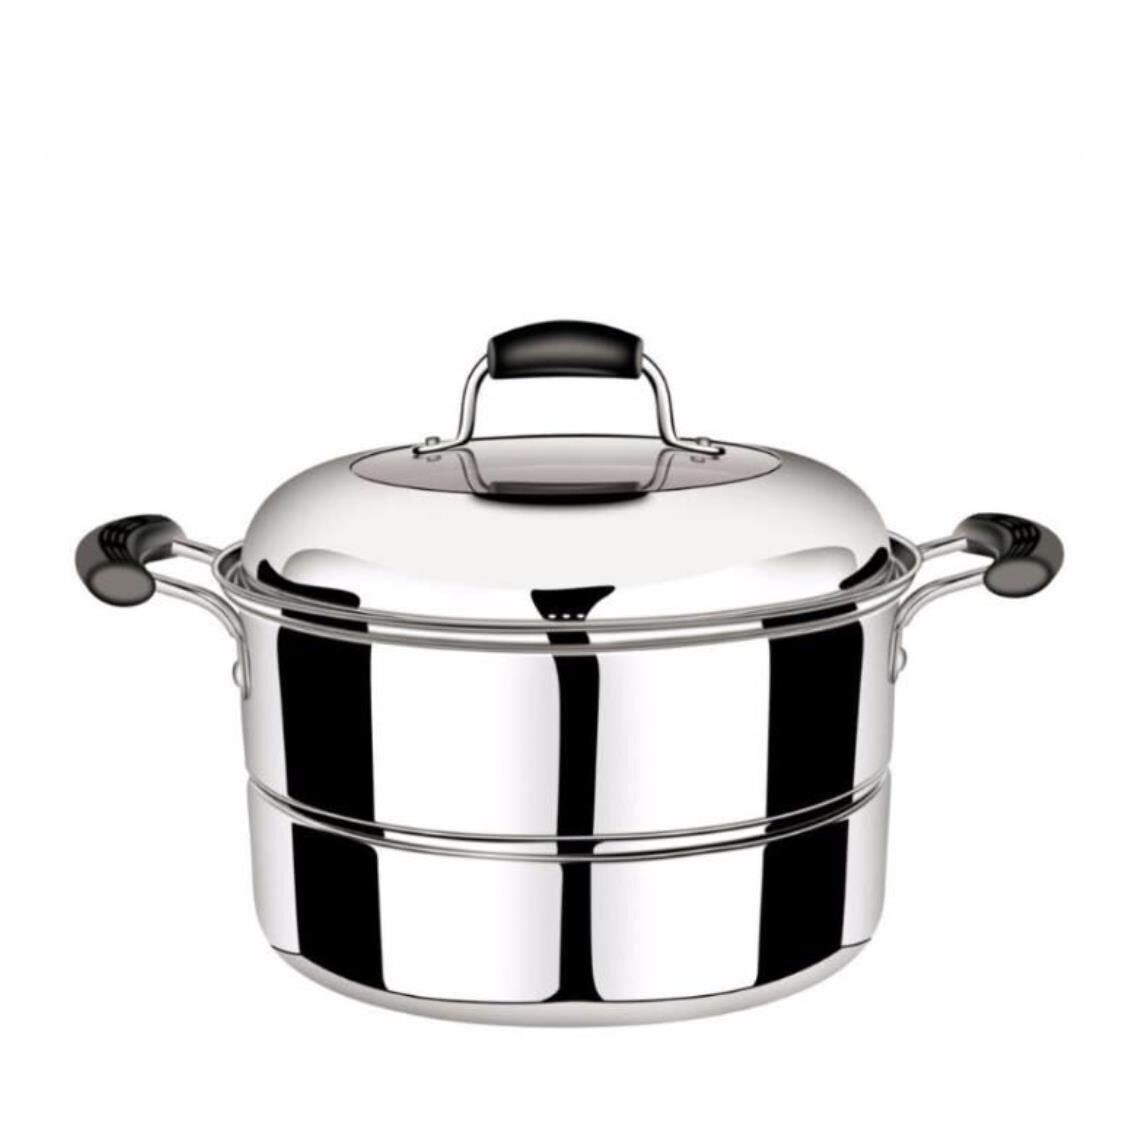 Dolphin Stainless Steel Steamer Pot 26cm DXDK010